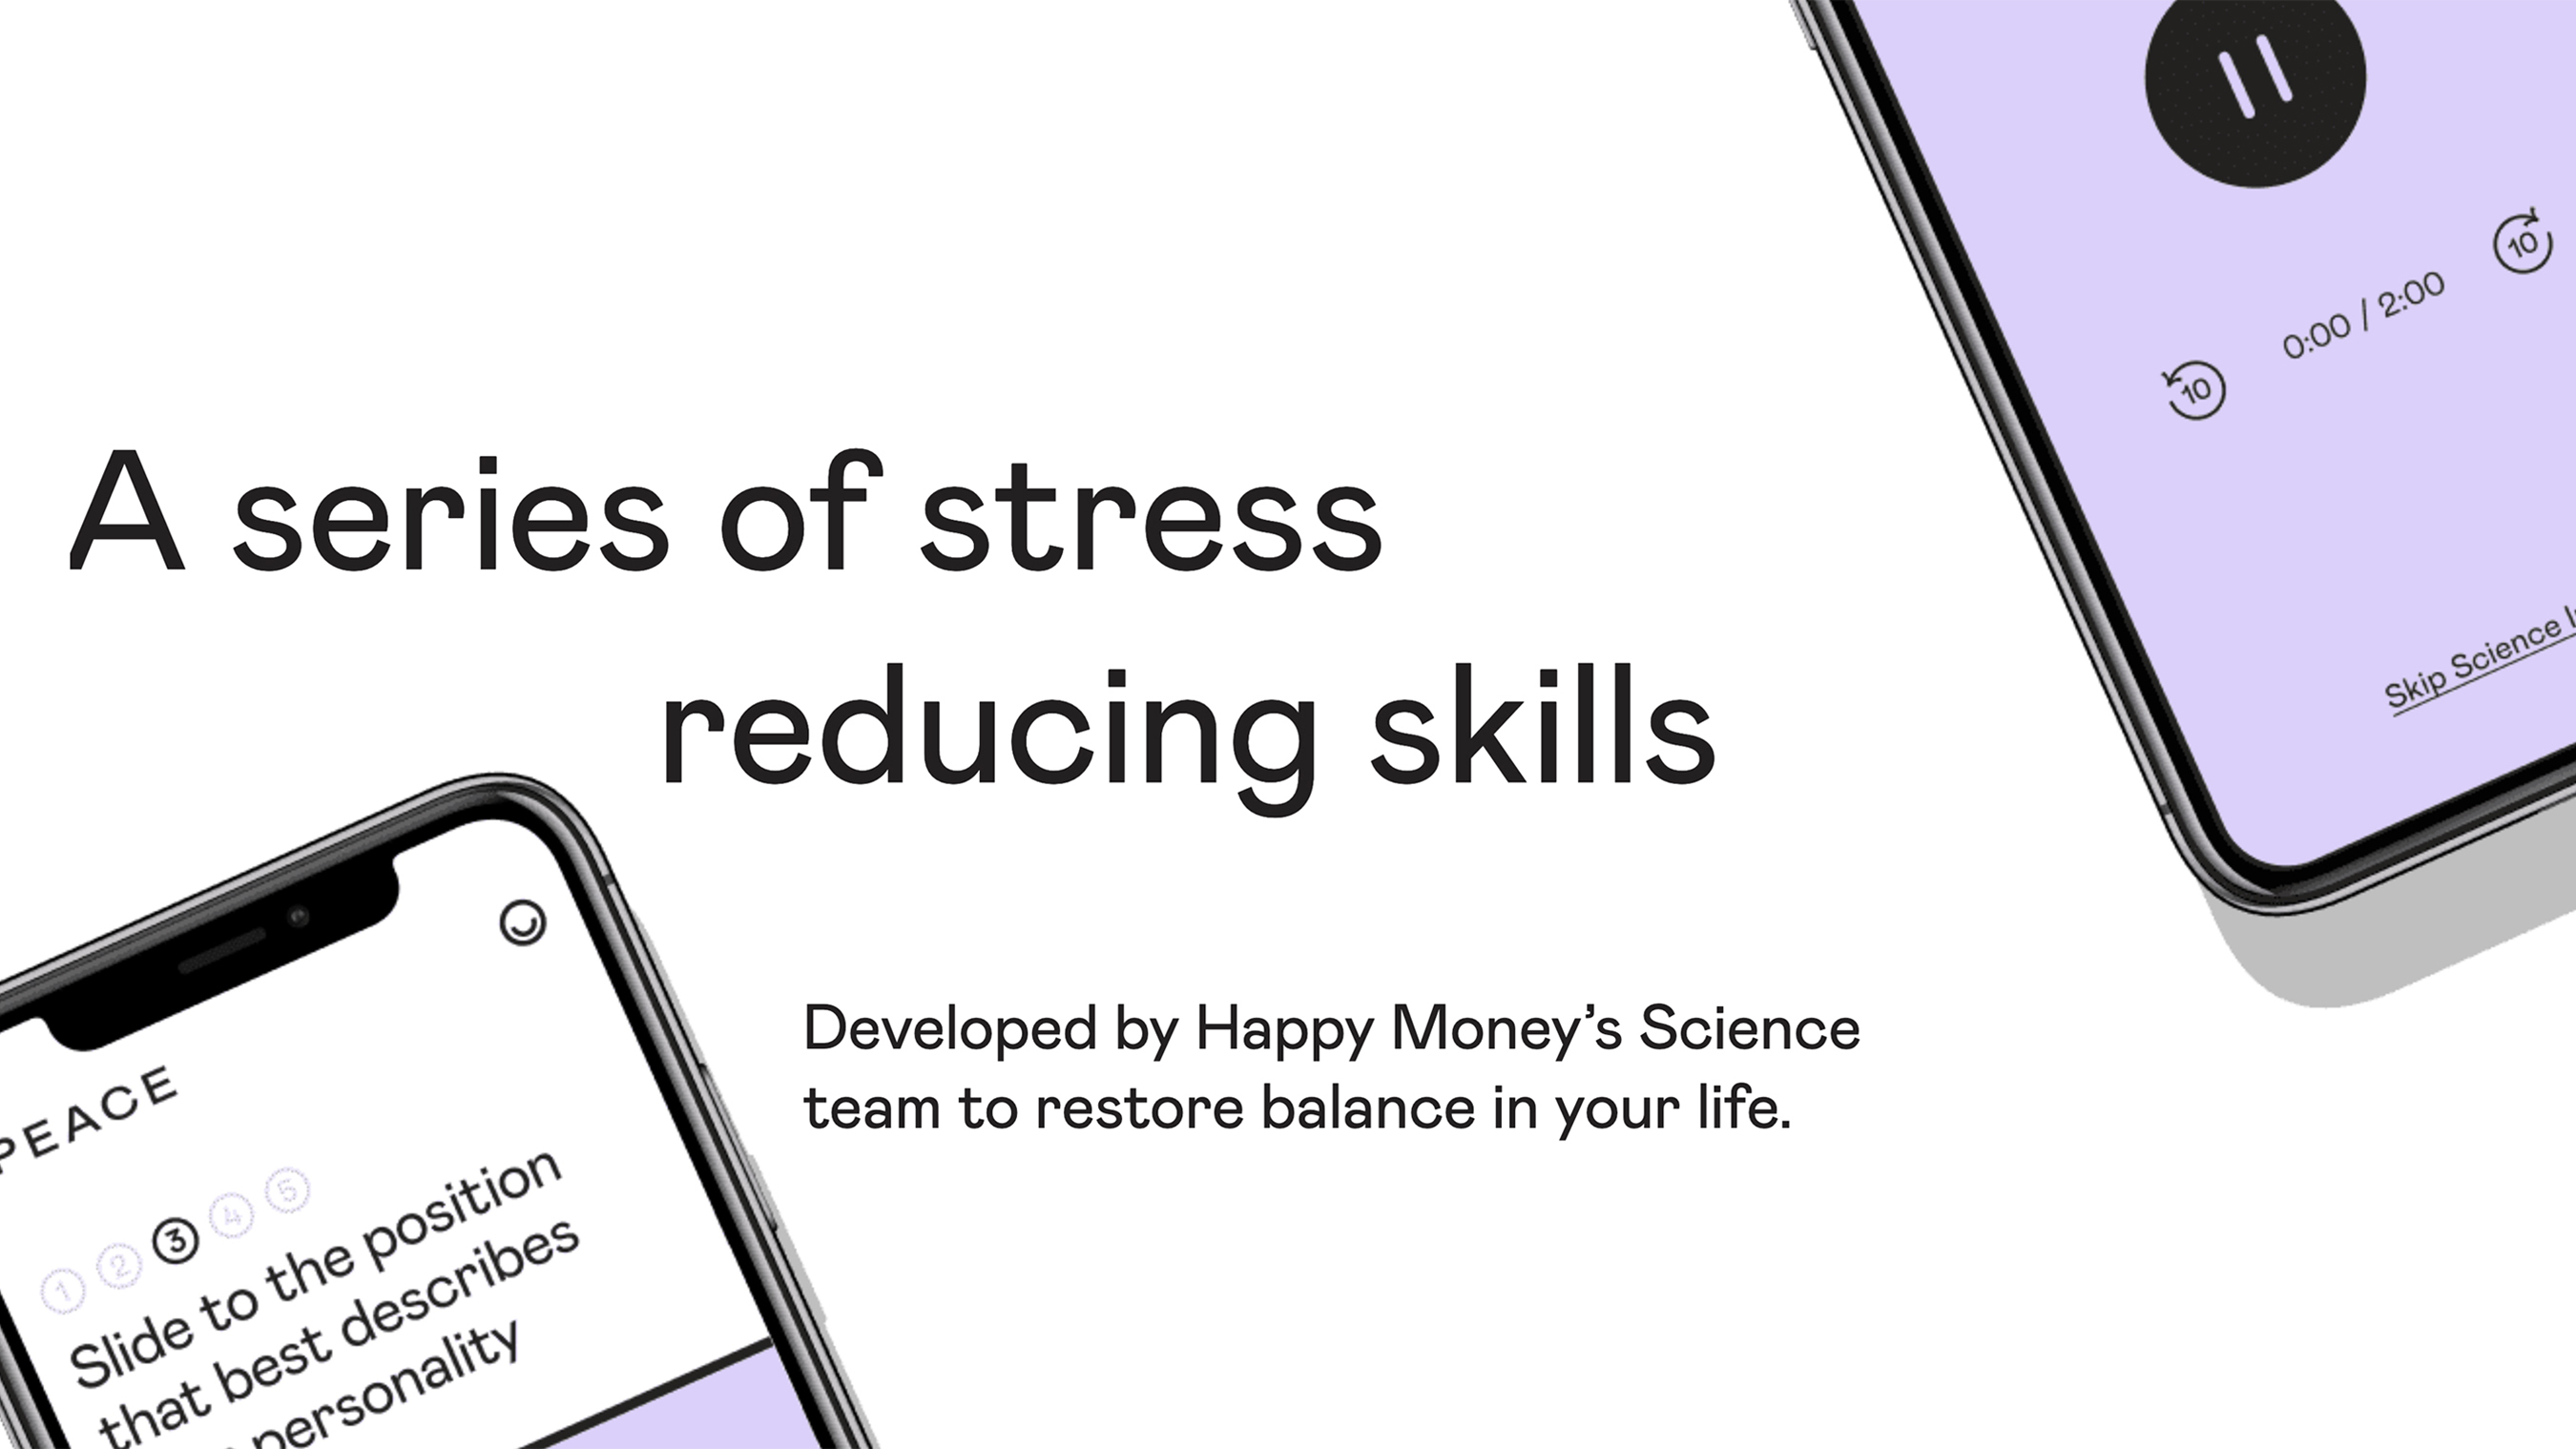 Happy Money Offers Peace - A Free, 6-Week Wellness Course